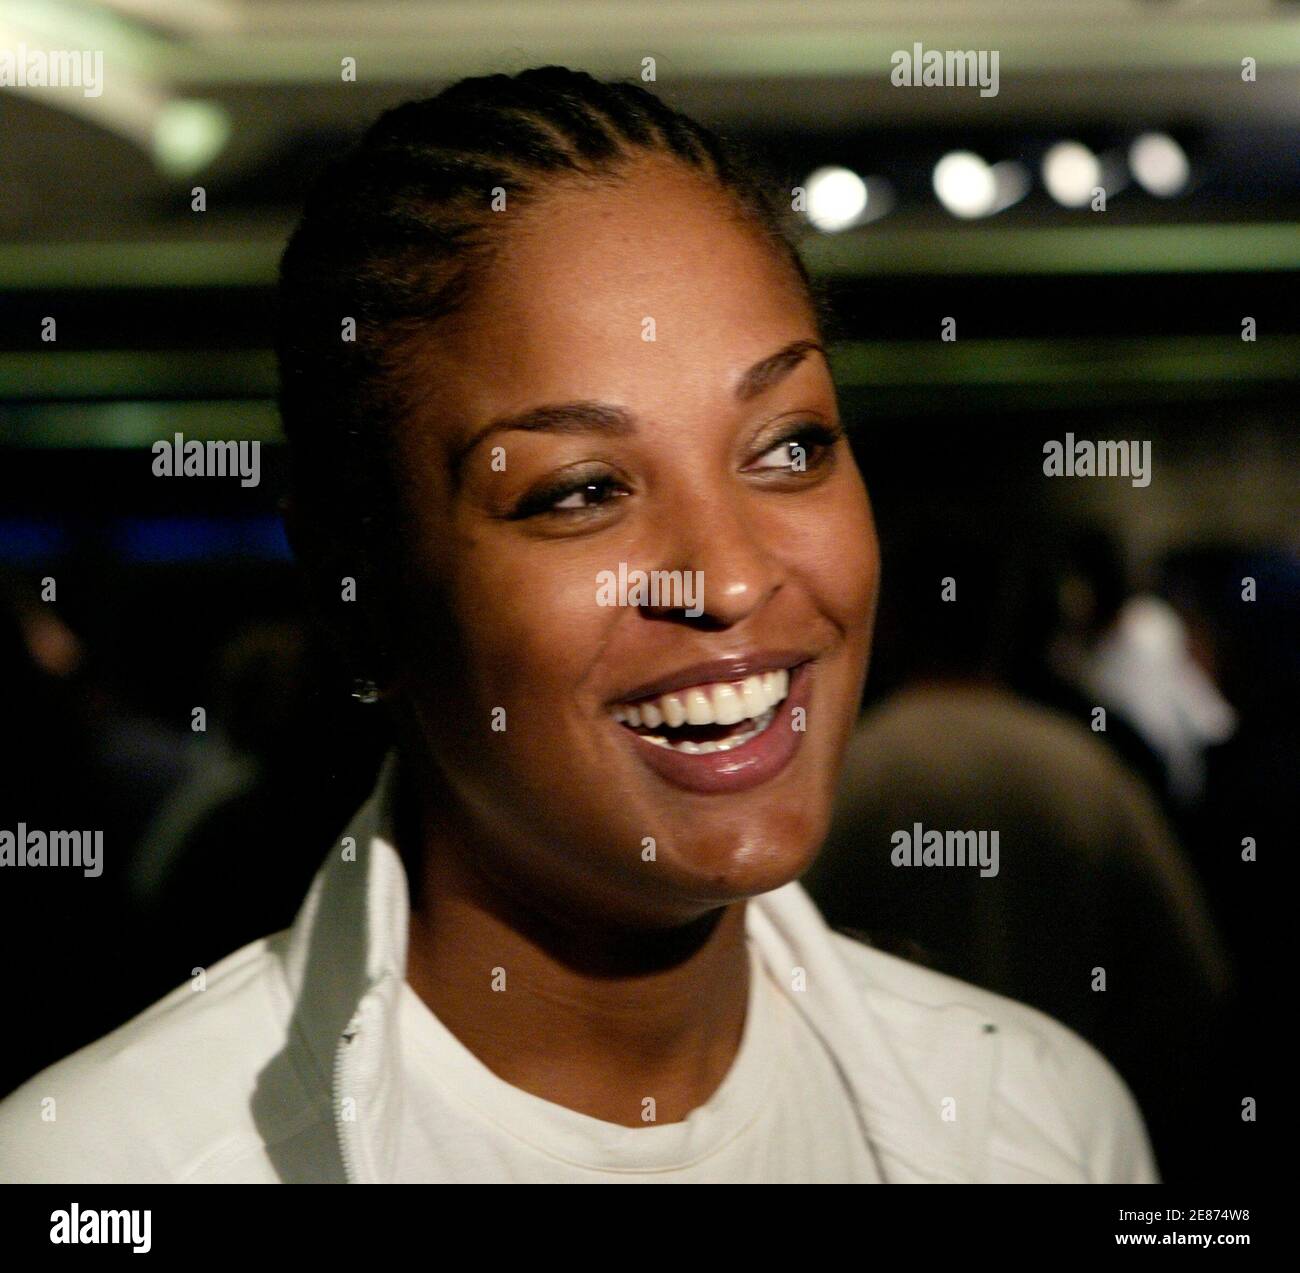 Boxer Laila Ali smiles during the weigh-in at Madison Square Garden in New  York November 10, 2006. Laila is the daughter of boxing great Muhammad Ali  and will fight Shelly Burton this